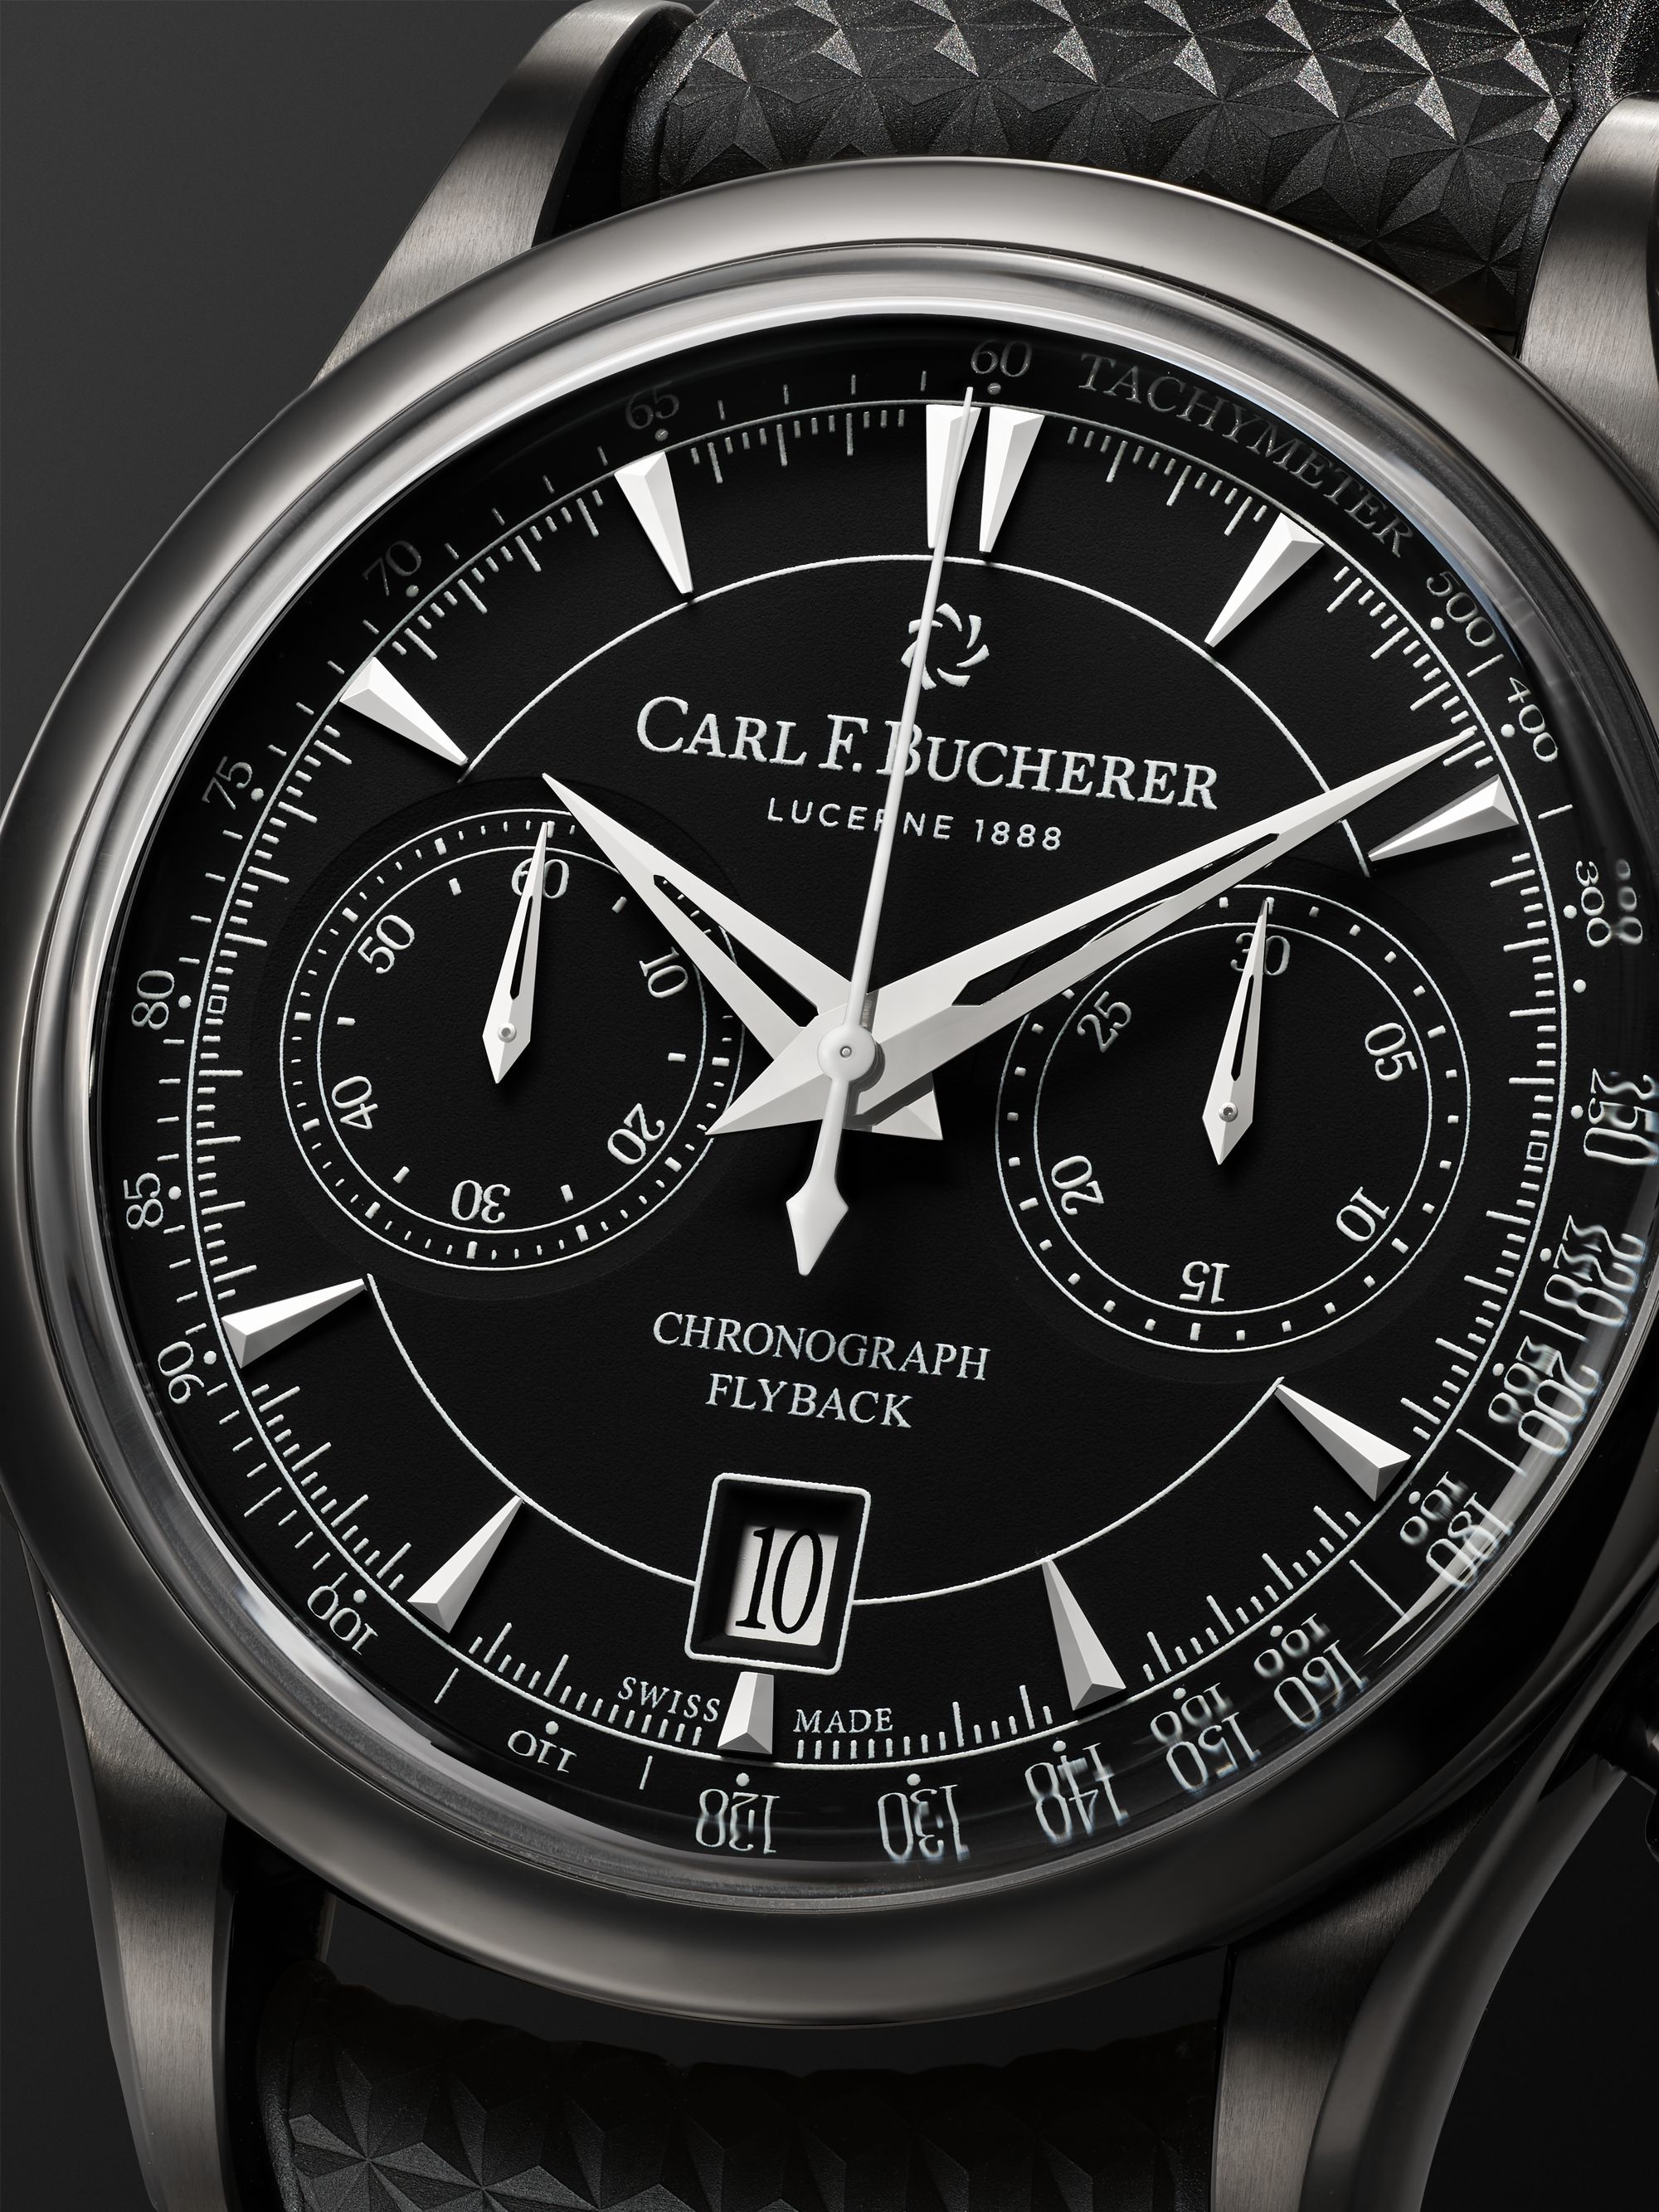 CARL F. BUCHERER Manero Automatic Flyback Chronograph 43mm Steel and Rubber  Watch, Ref. No. 00.10919.12.33.01 | MR PORTER